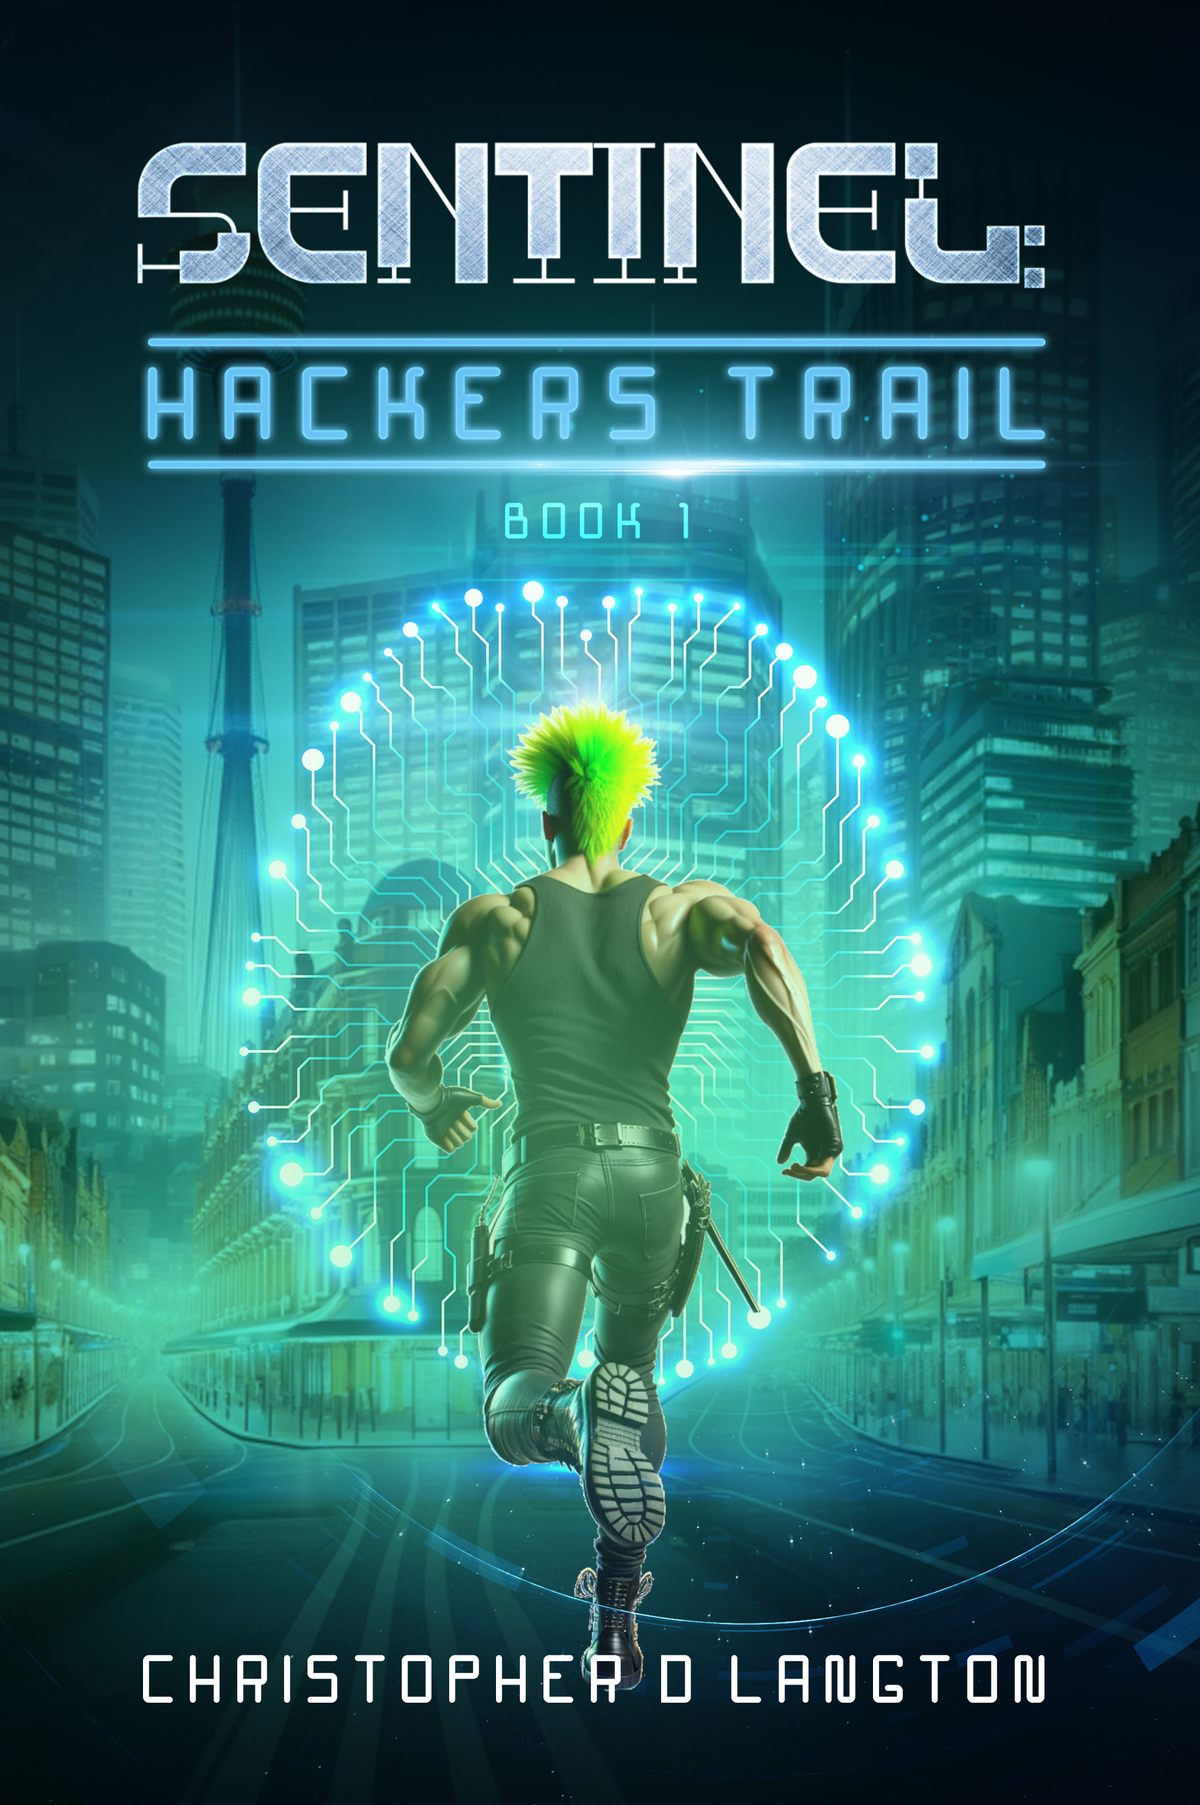 Sentinel: Hackers Trail | Chapter teasers